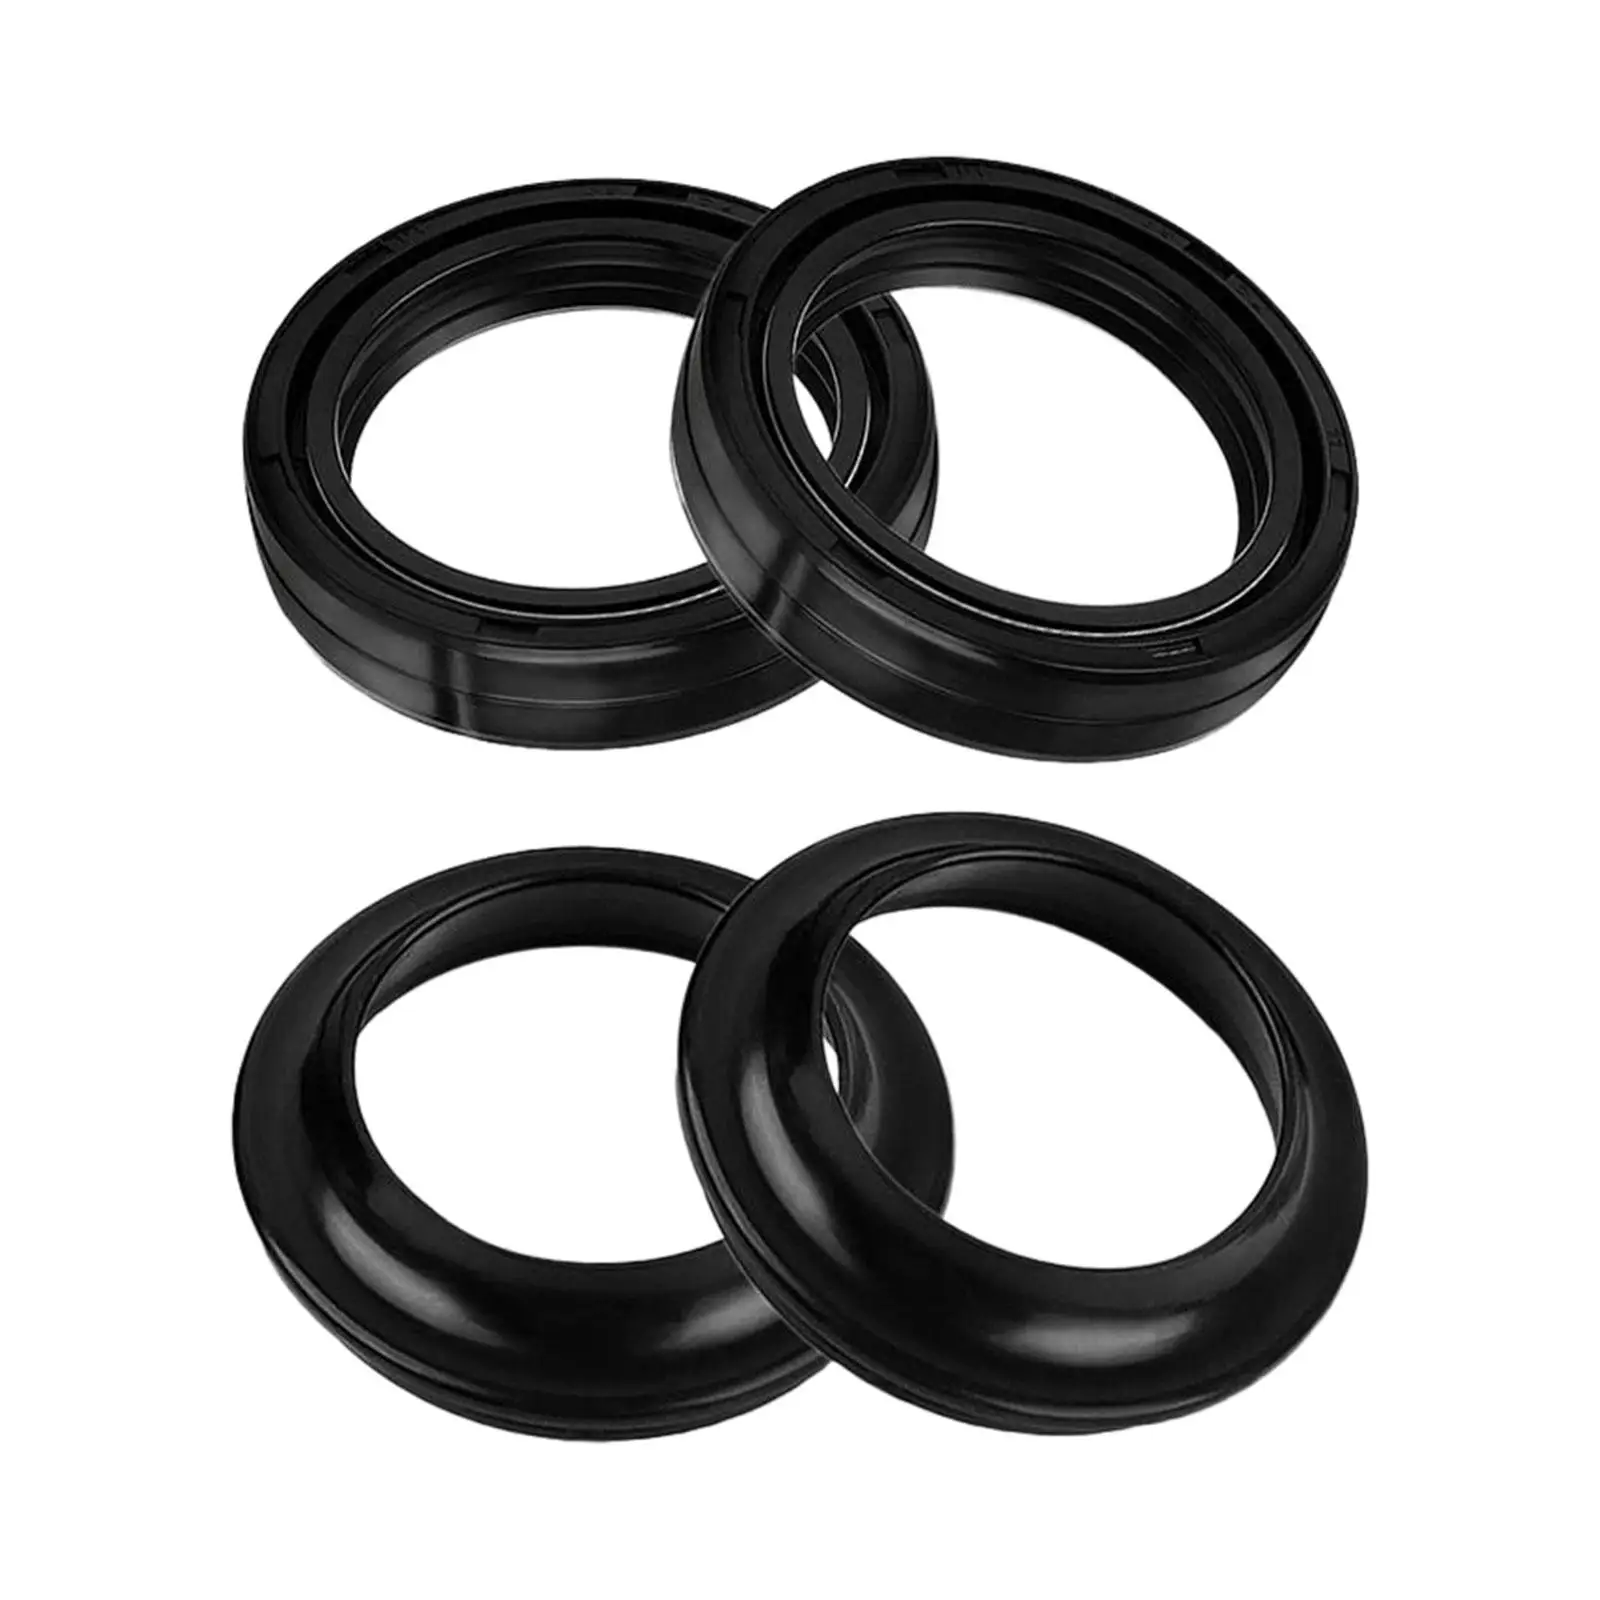 4 Pieces 39x52x11mm Front Fork Oil Seal & Dust Cover Durable Premium Rubber Wear